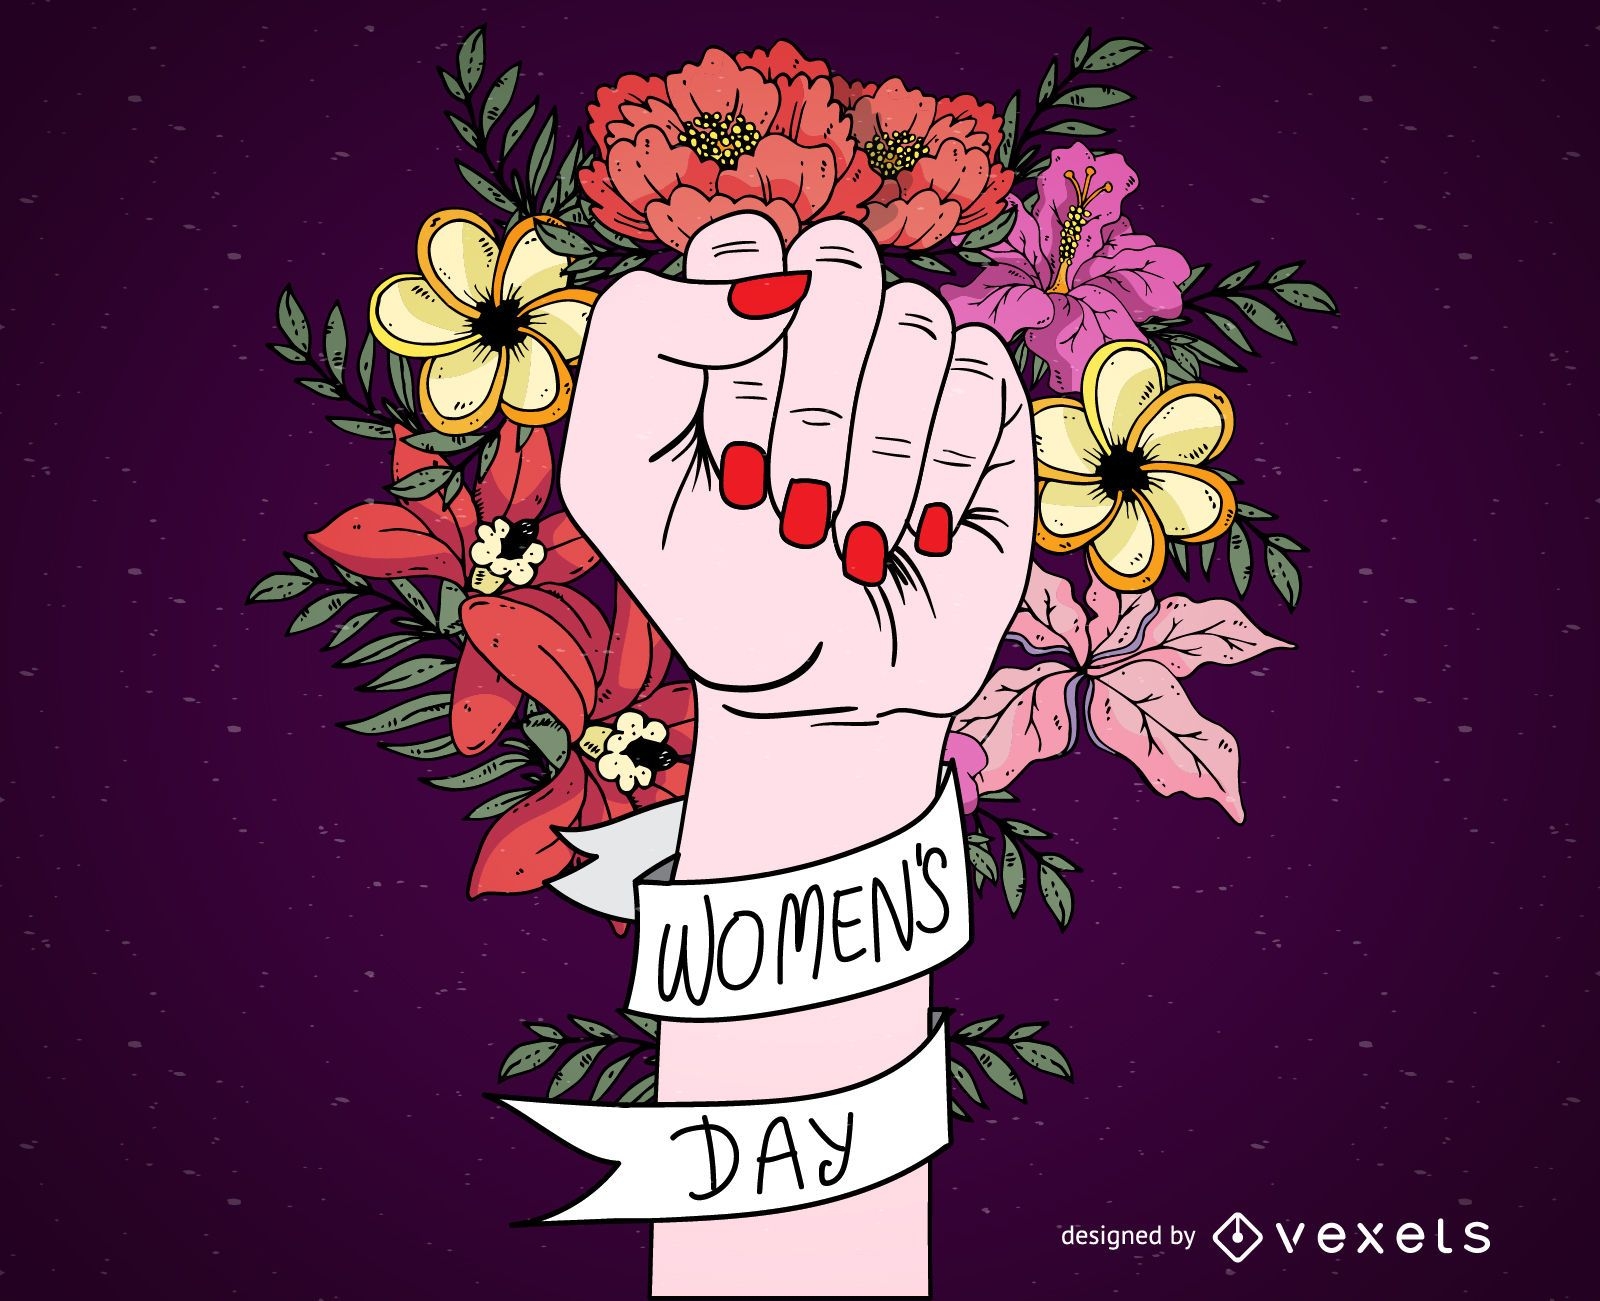 Women's Day sign with flowers and ribbon